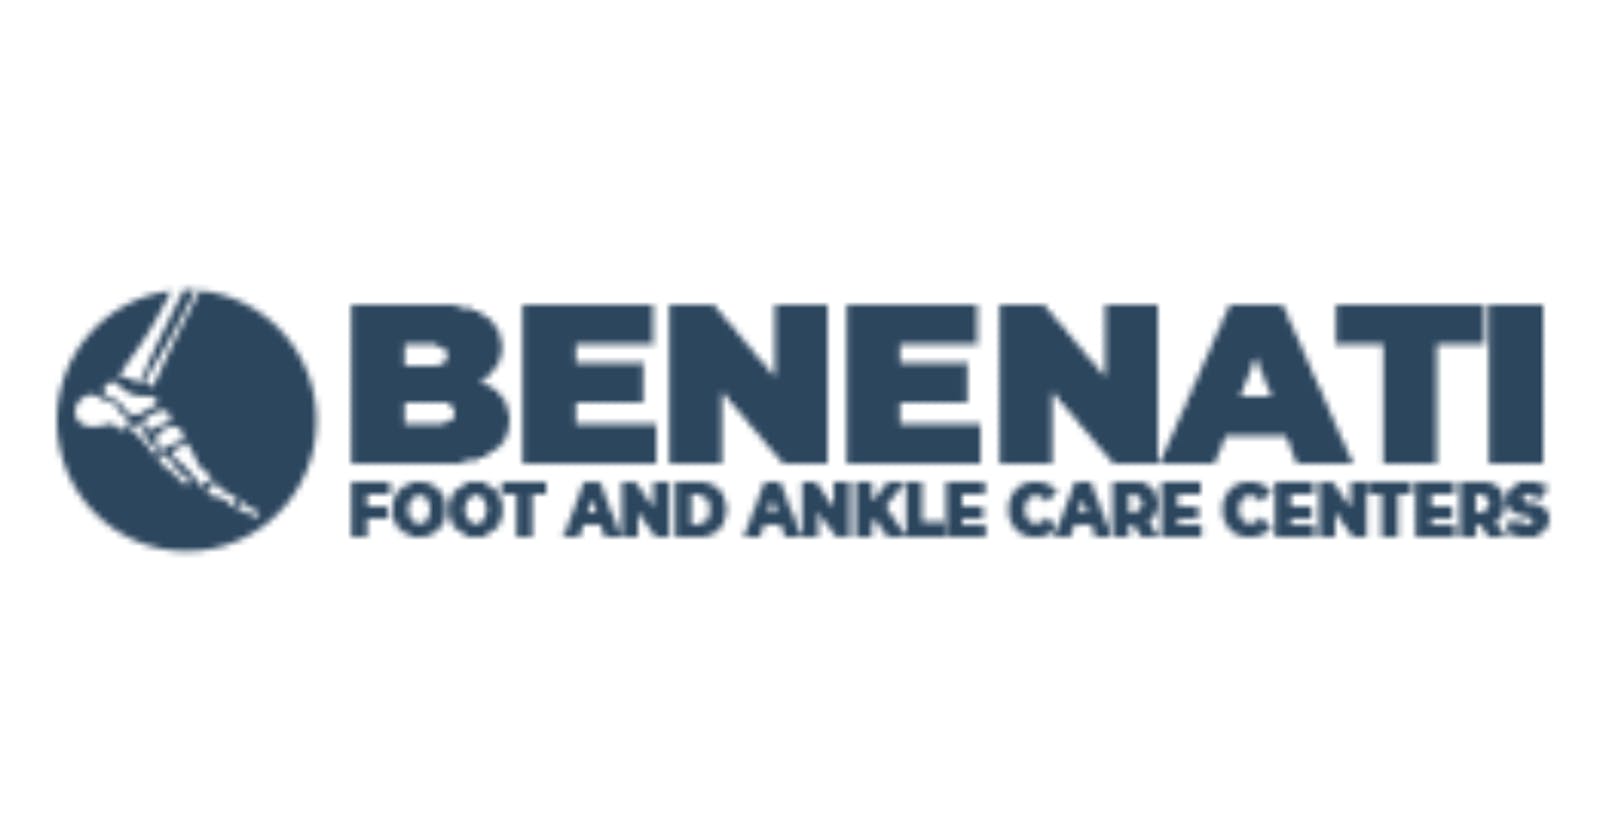 Benenati Foot & Ankle Care: Your Premier Foot Doctor in Warren and Ankle Foot Care Center